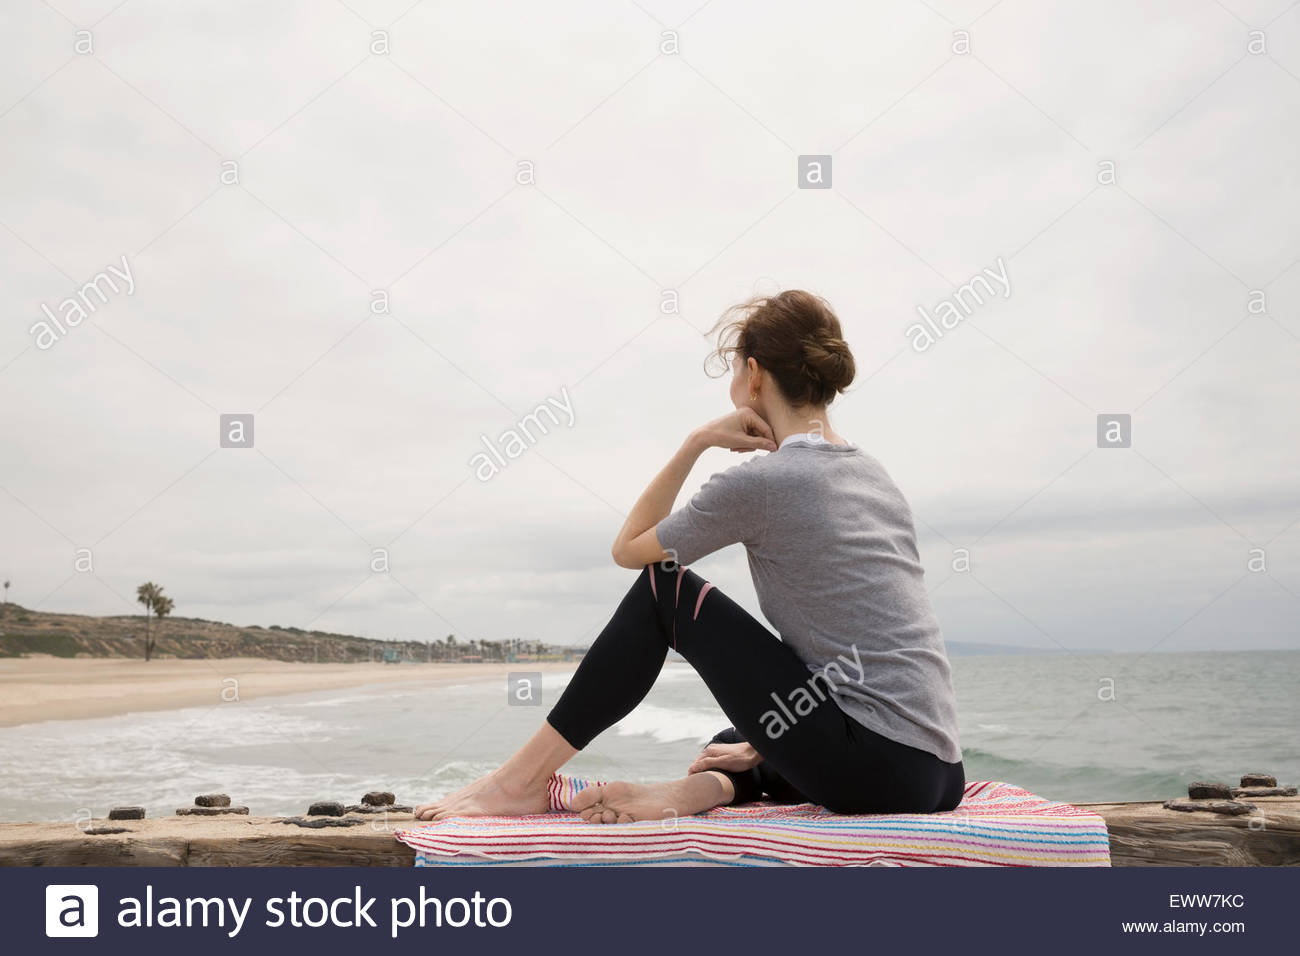 Woman sitting on beach blanket looking at view Stock Photo